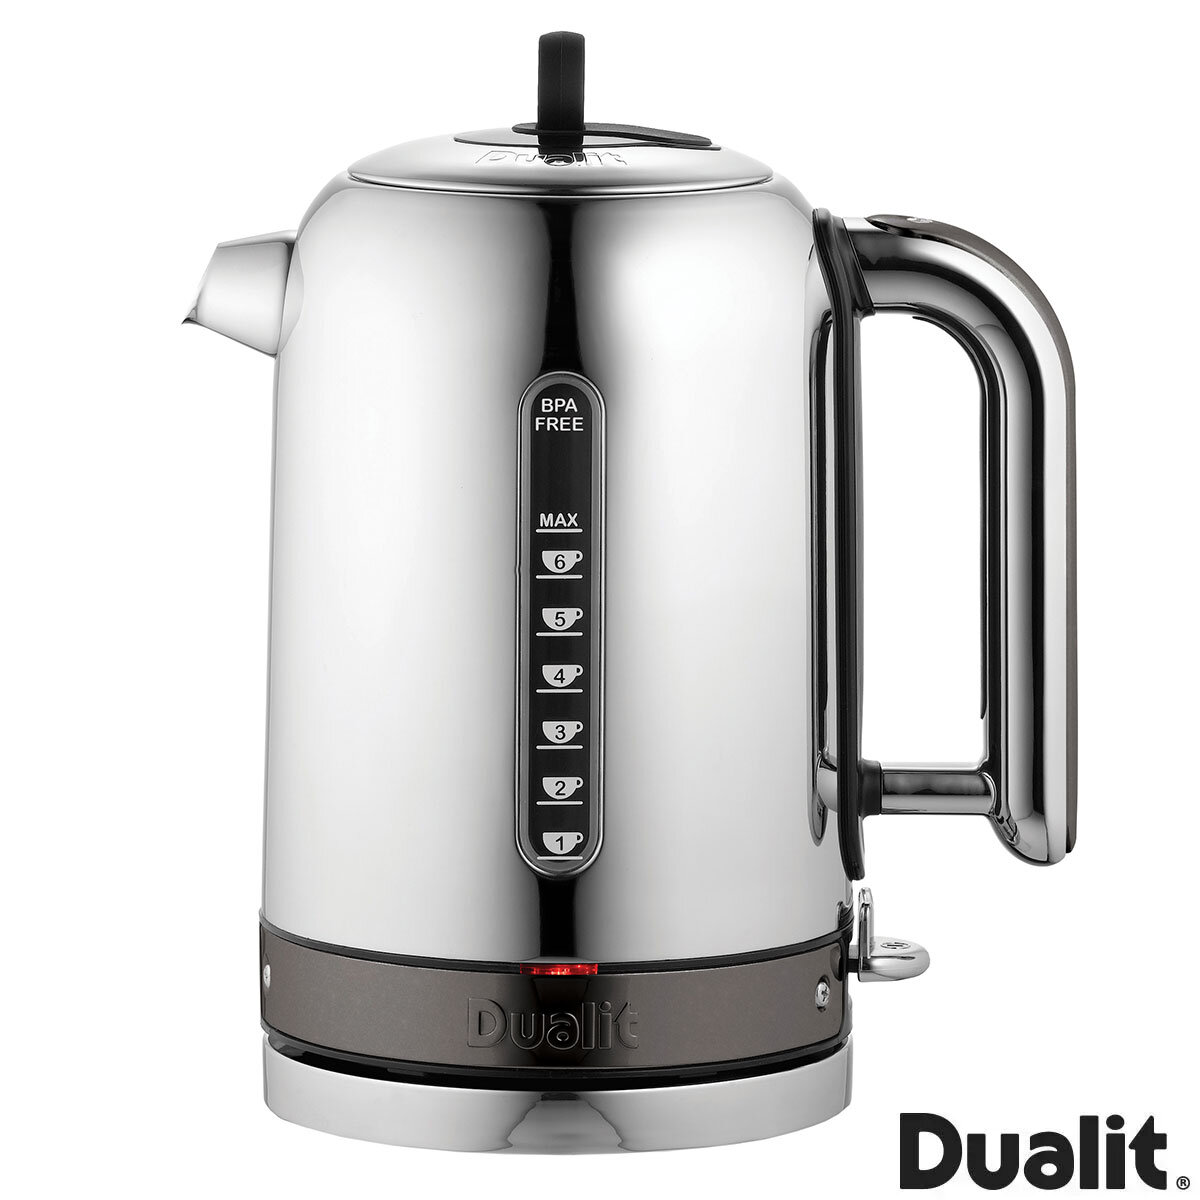 Dualit Classic 72820 review - Which?